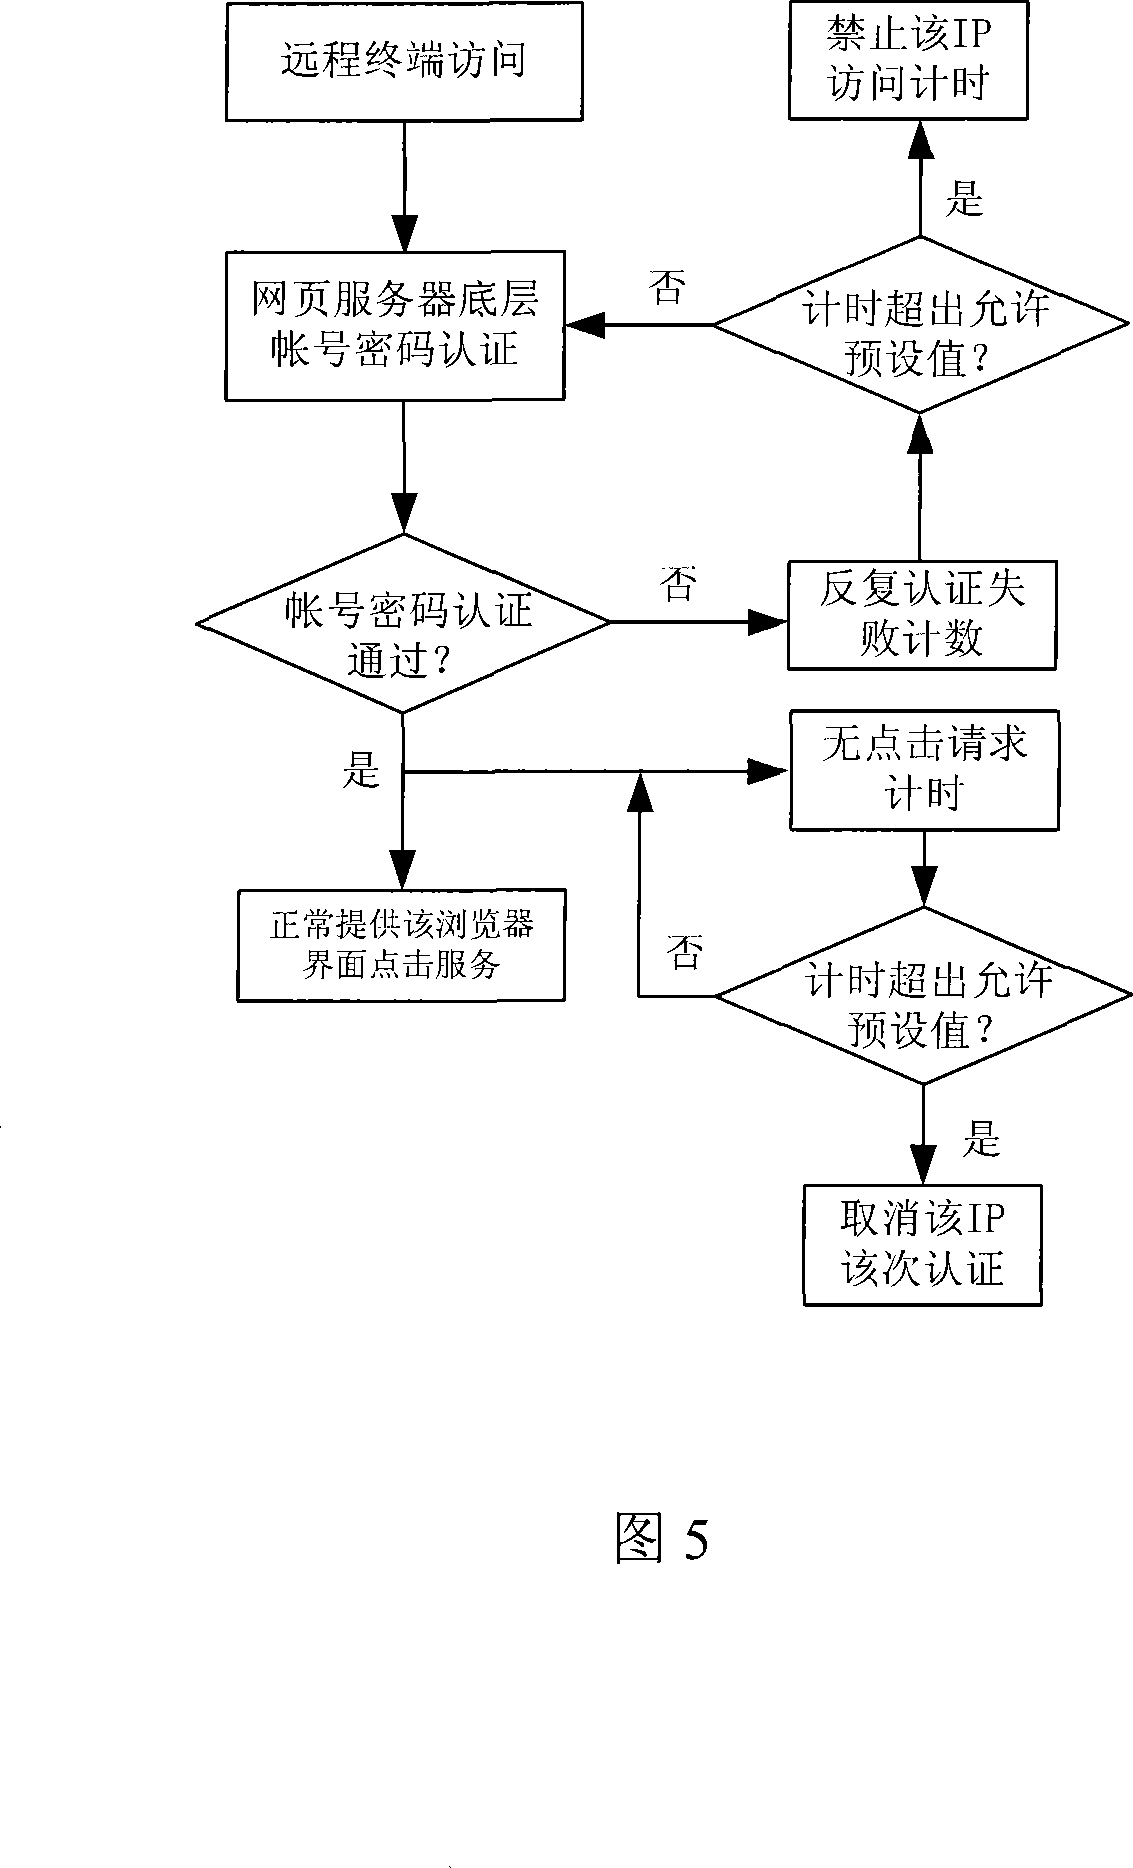 Remote network household electrical appliance control system and its control method